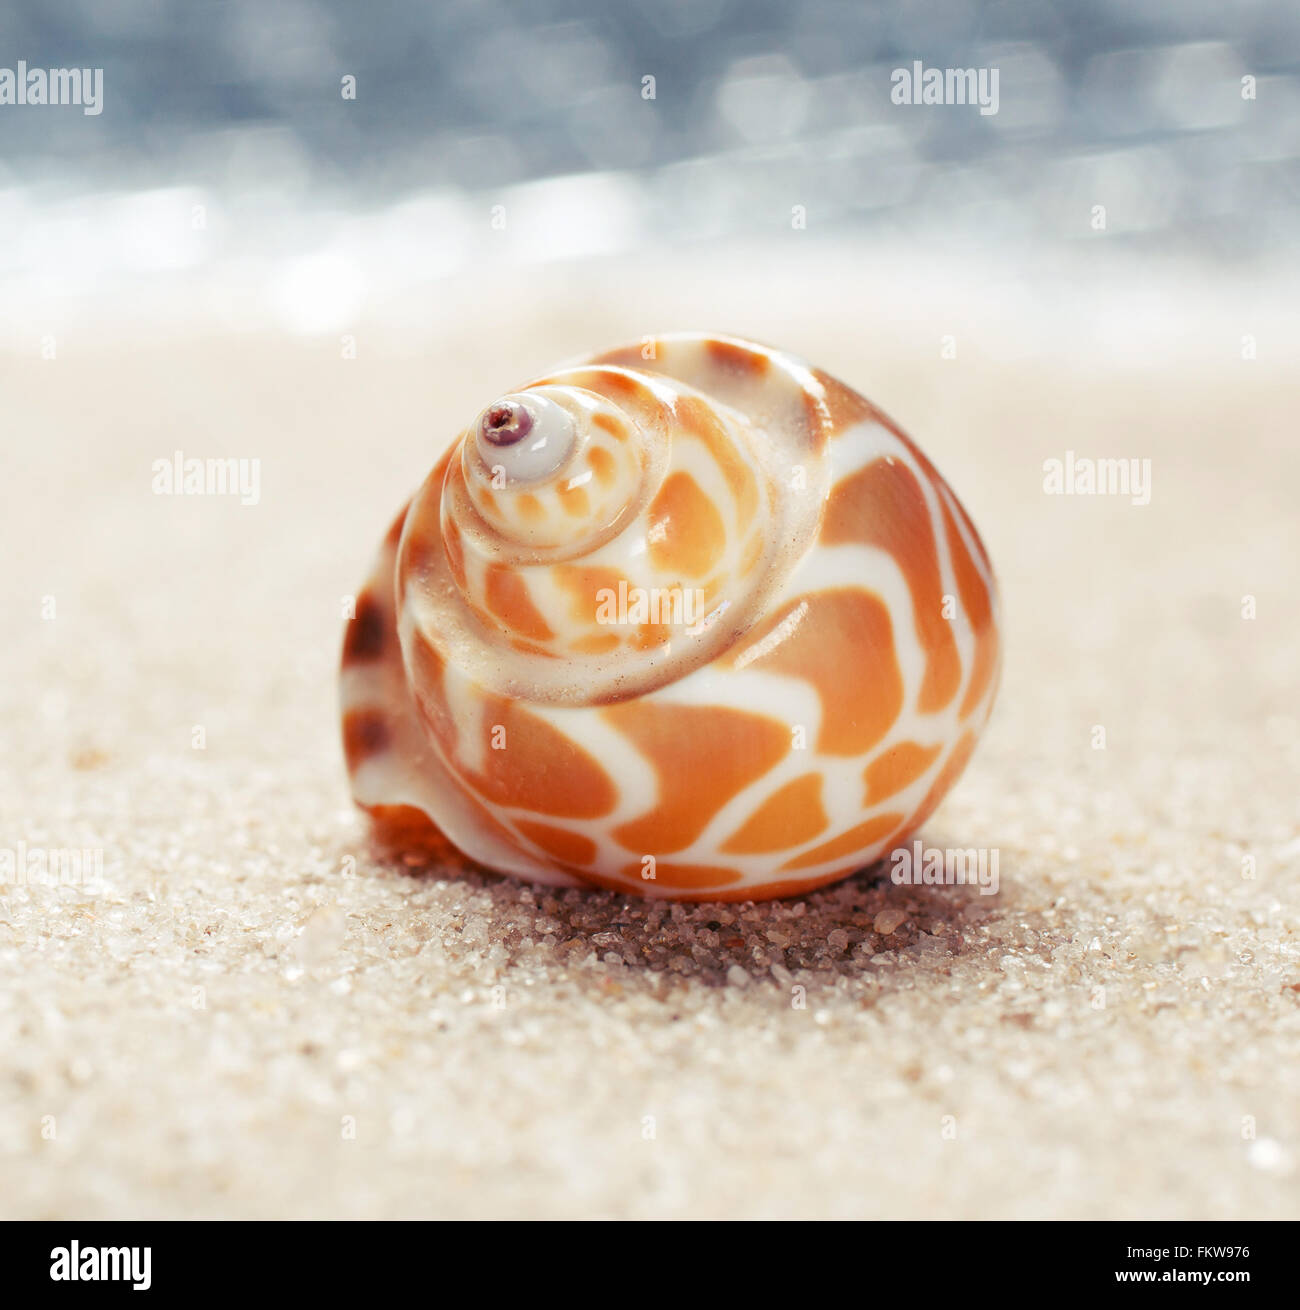 Sea shell on sandy beach Banque D'Images